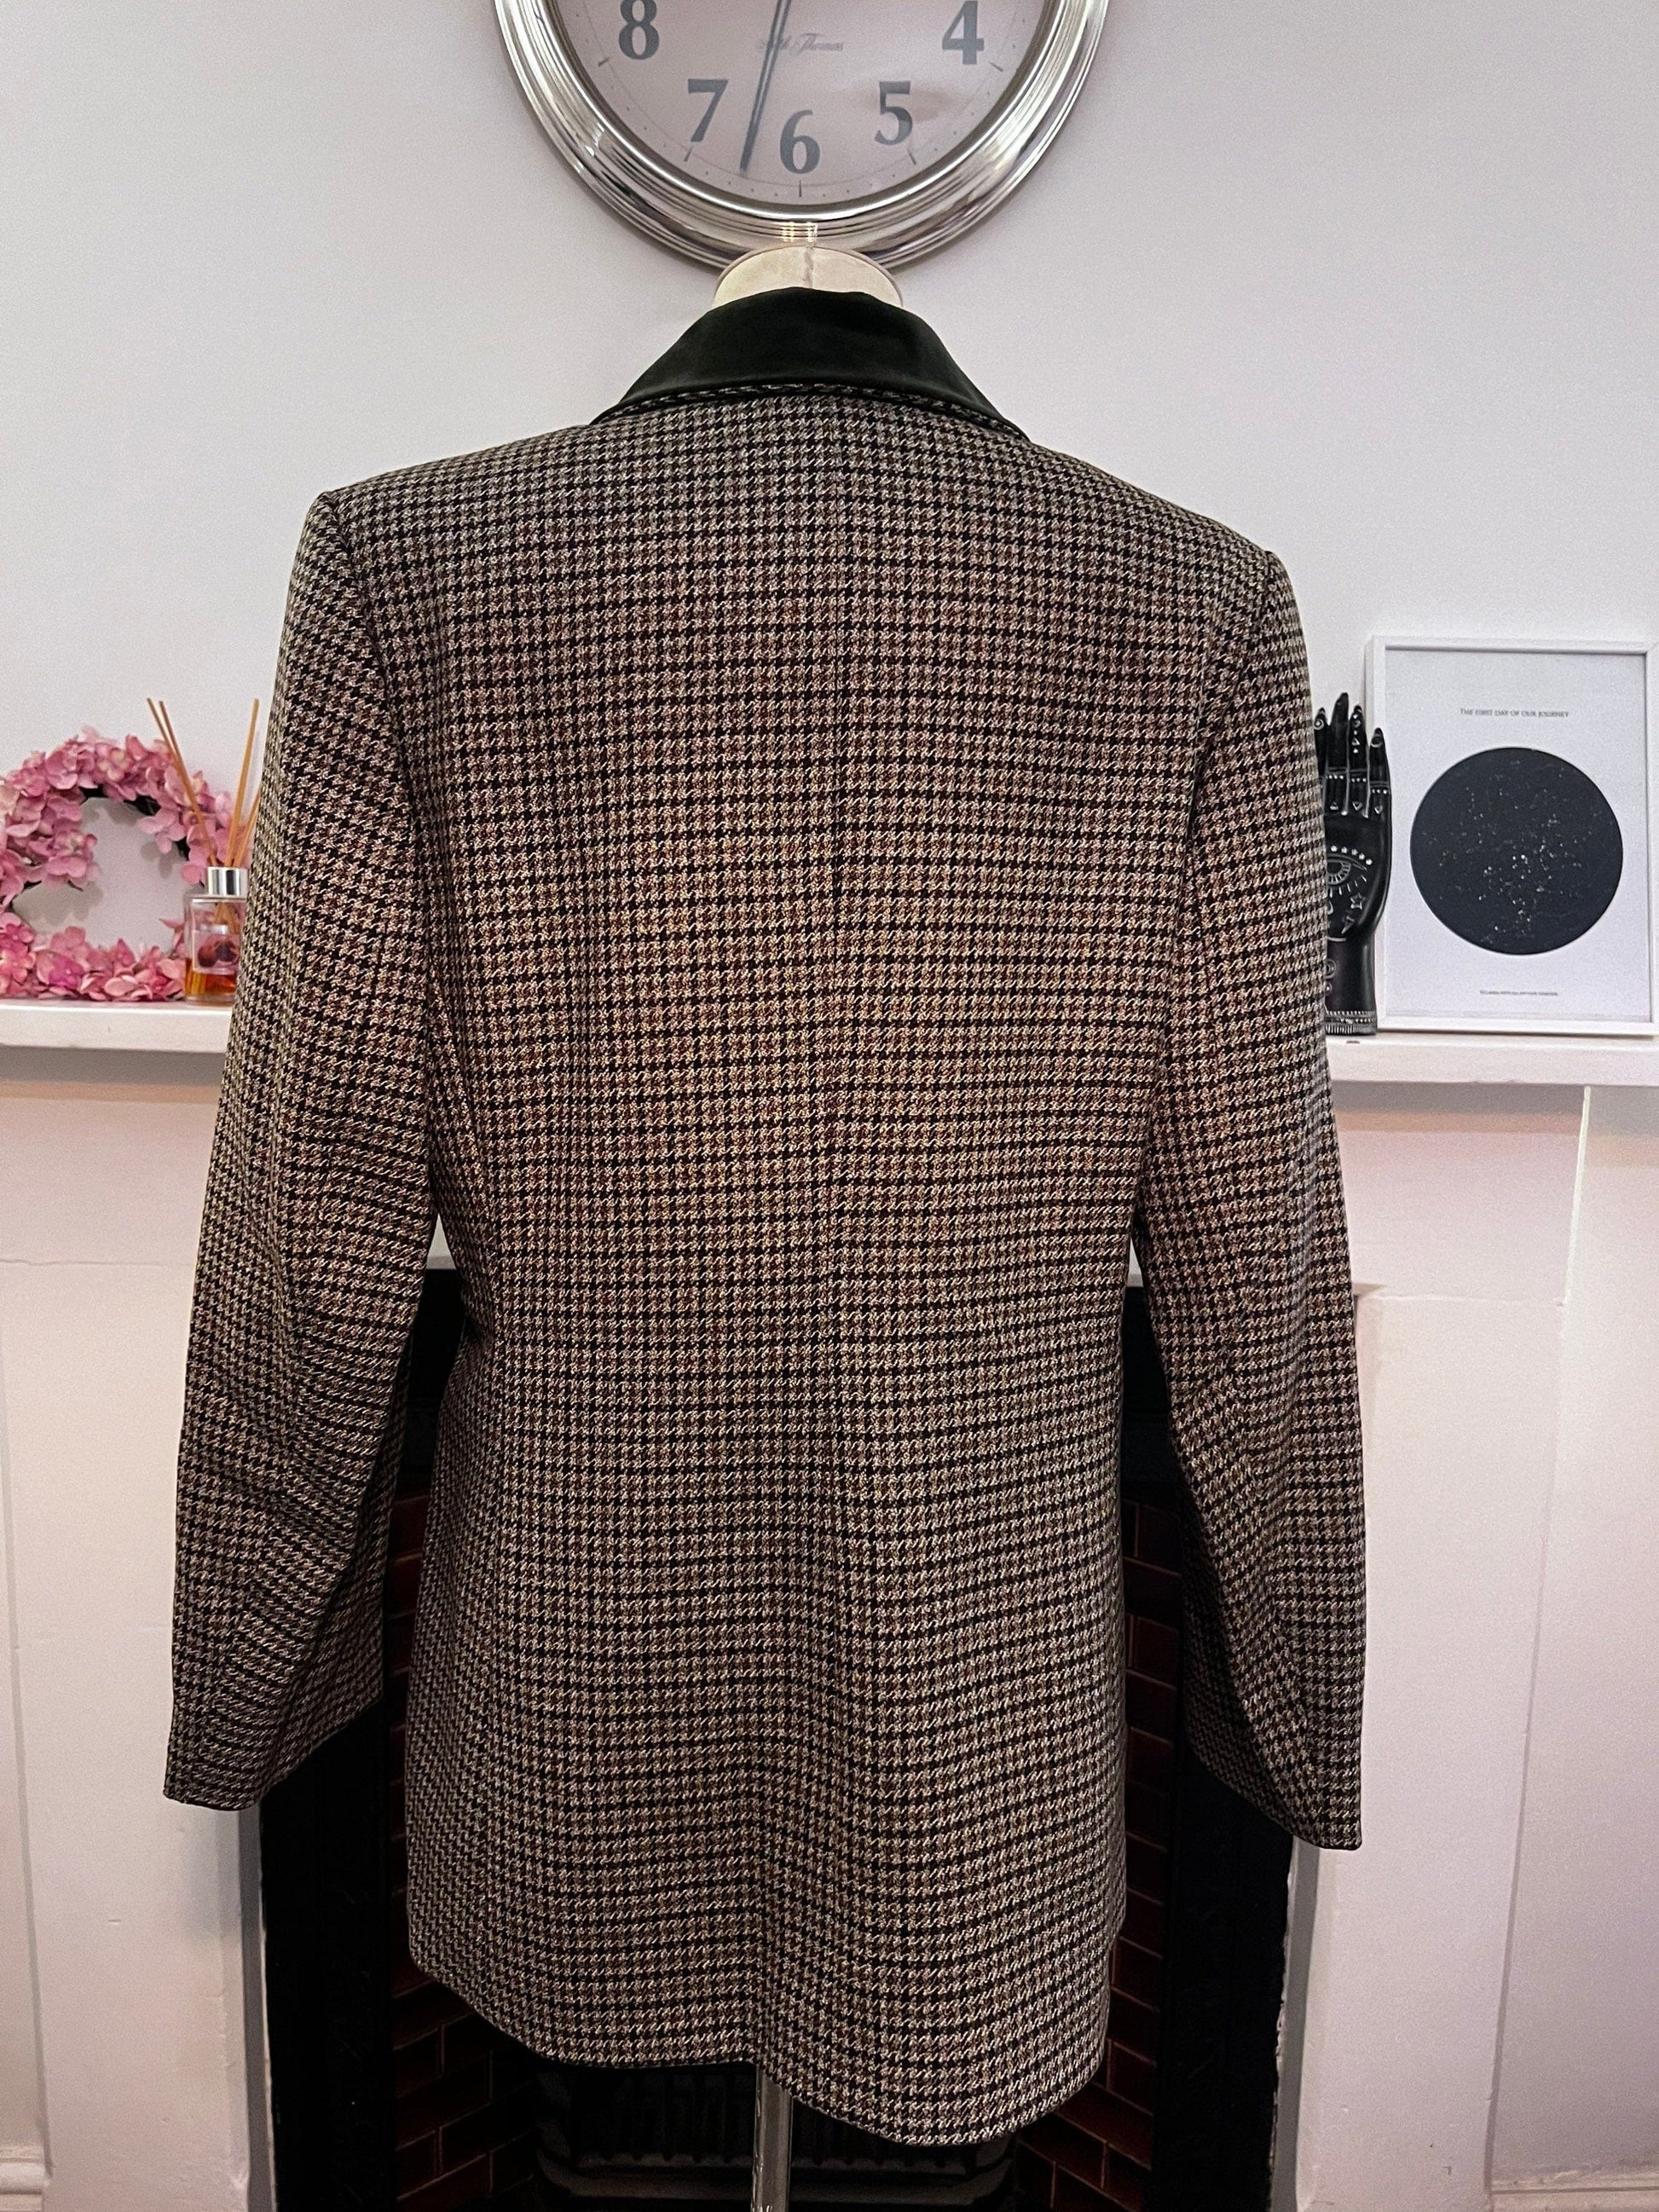 Vintage Green Tweed Blazer M&S Olive Green Tweed Houndstooth Blazer Jacket - Still includes tags from 1995 St Michael collection